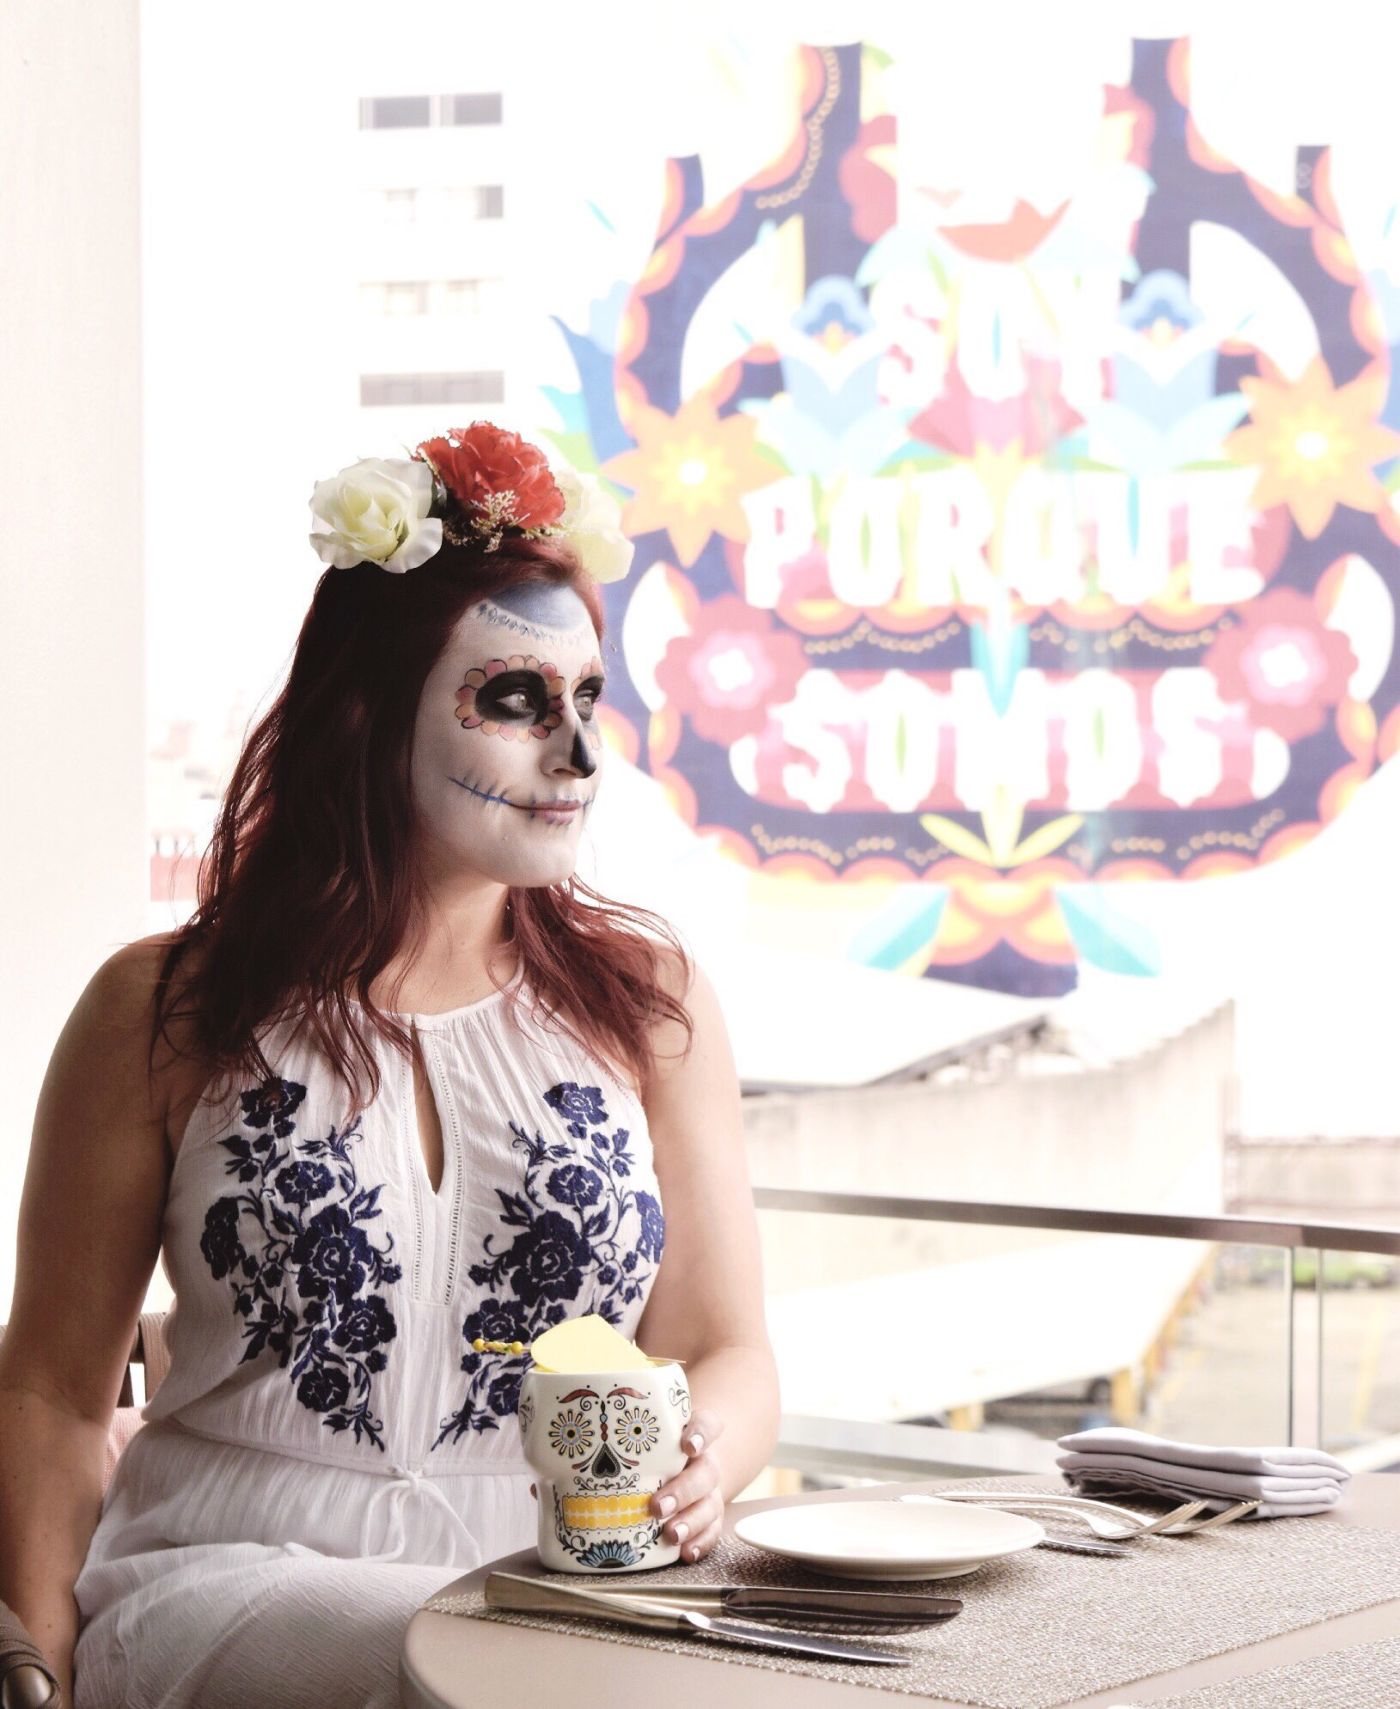 day of the dead in mexico city, day of the dead vlog, day of the dead makeup, sugar skull makeup, mexico city tourist tips, where to go in mexico city, day of the dead parade